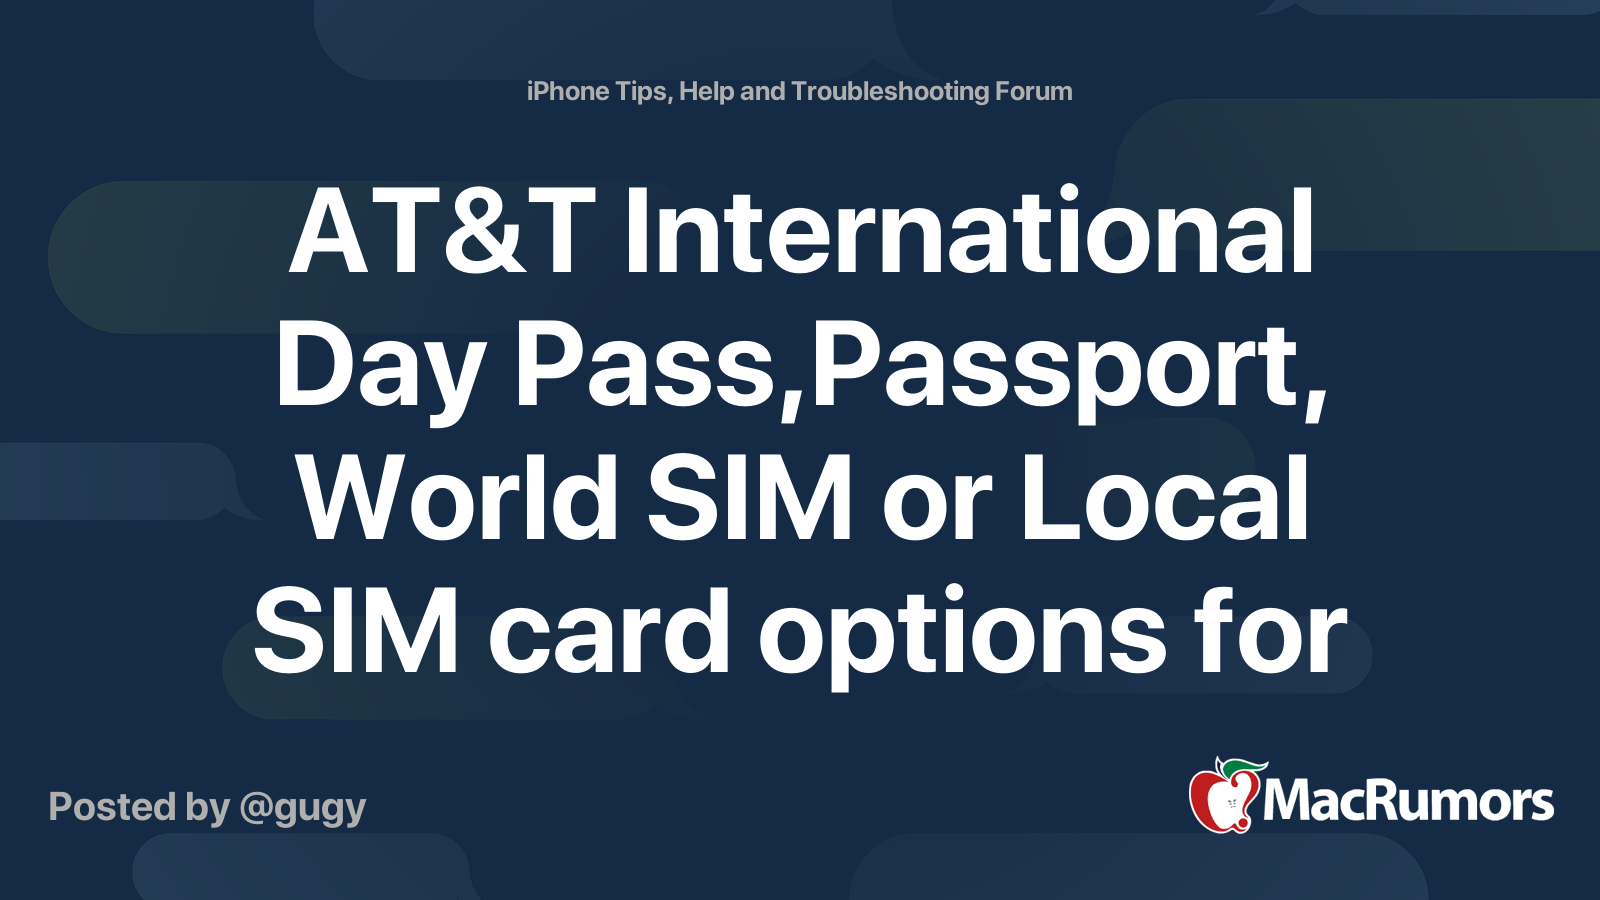 Atandt International Day Pass Passport World Sim Or Local Sim Card Options For Travel Abroad